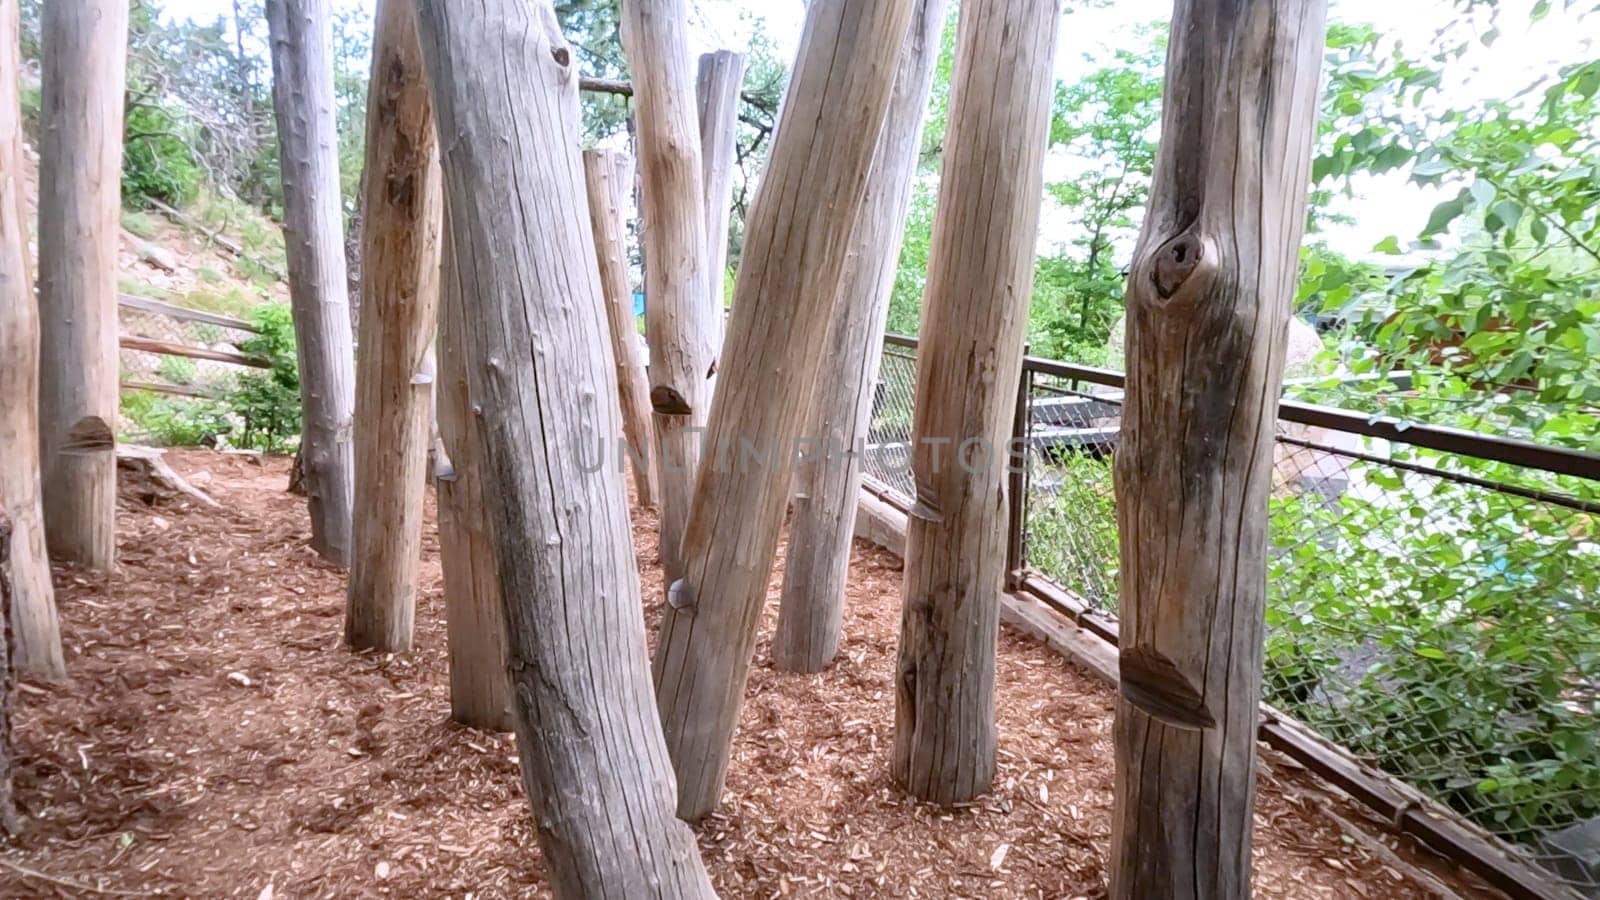 An outdoor play area featuring tall wooden poles and natural surroundings, with children seen in the background. The image captures the rustic and adventurous atmosphere of the play space.